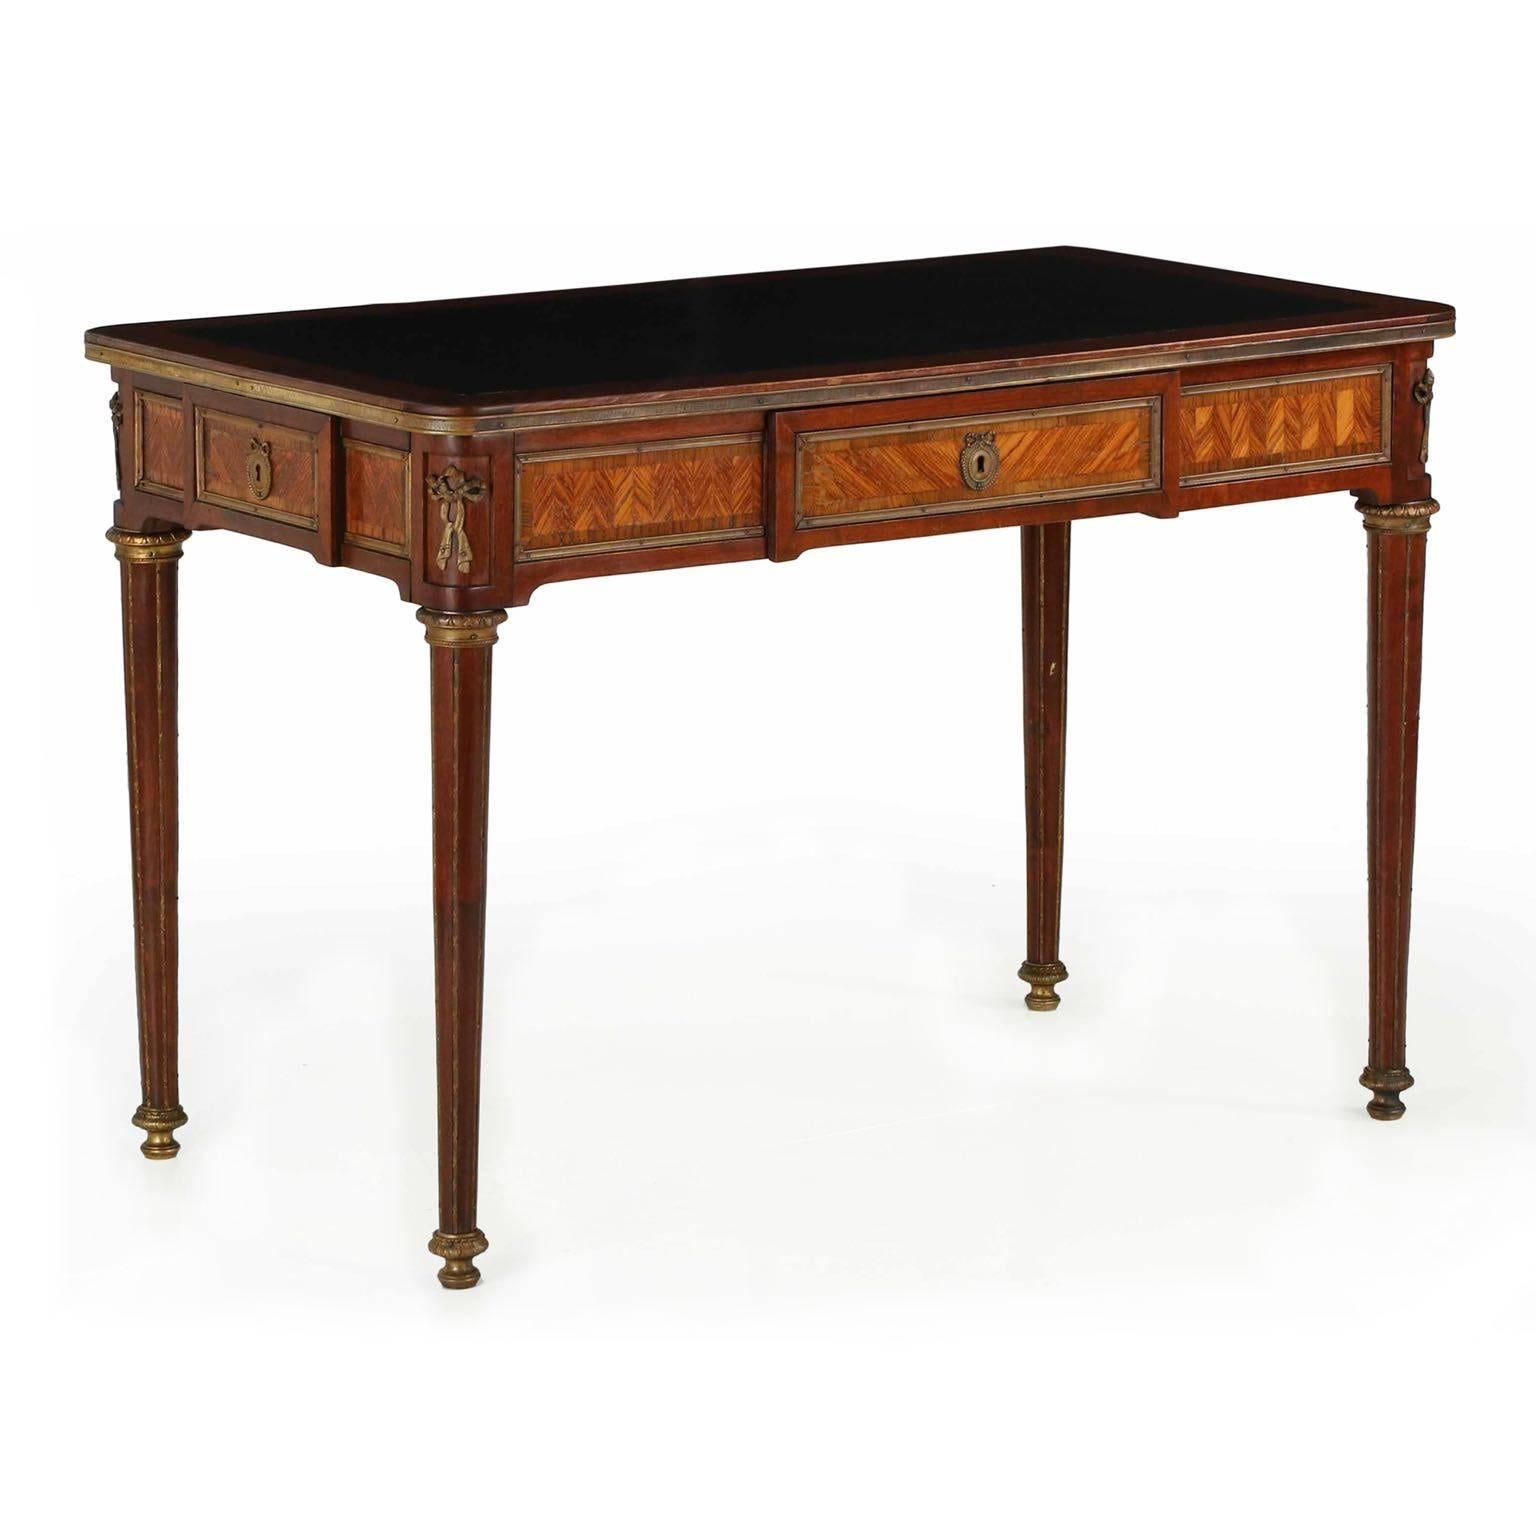 A most attractive writing table from the second quarter of the 20th century, this desk was crafted in the Louis XVI taste using exotic kingwood veneers laid out in an angular parquetry across each panel of the apron. The effect against the dark